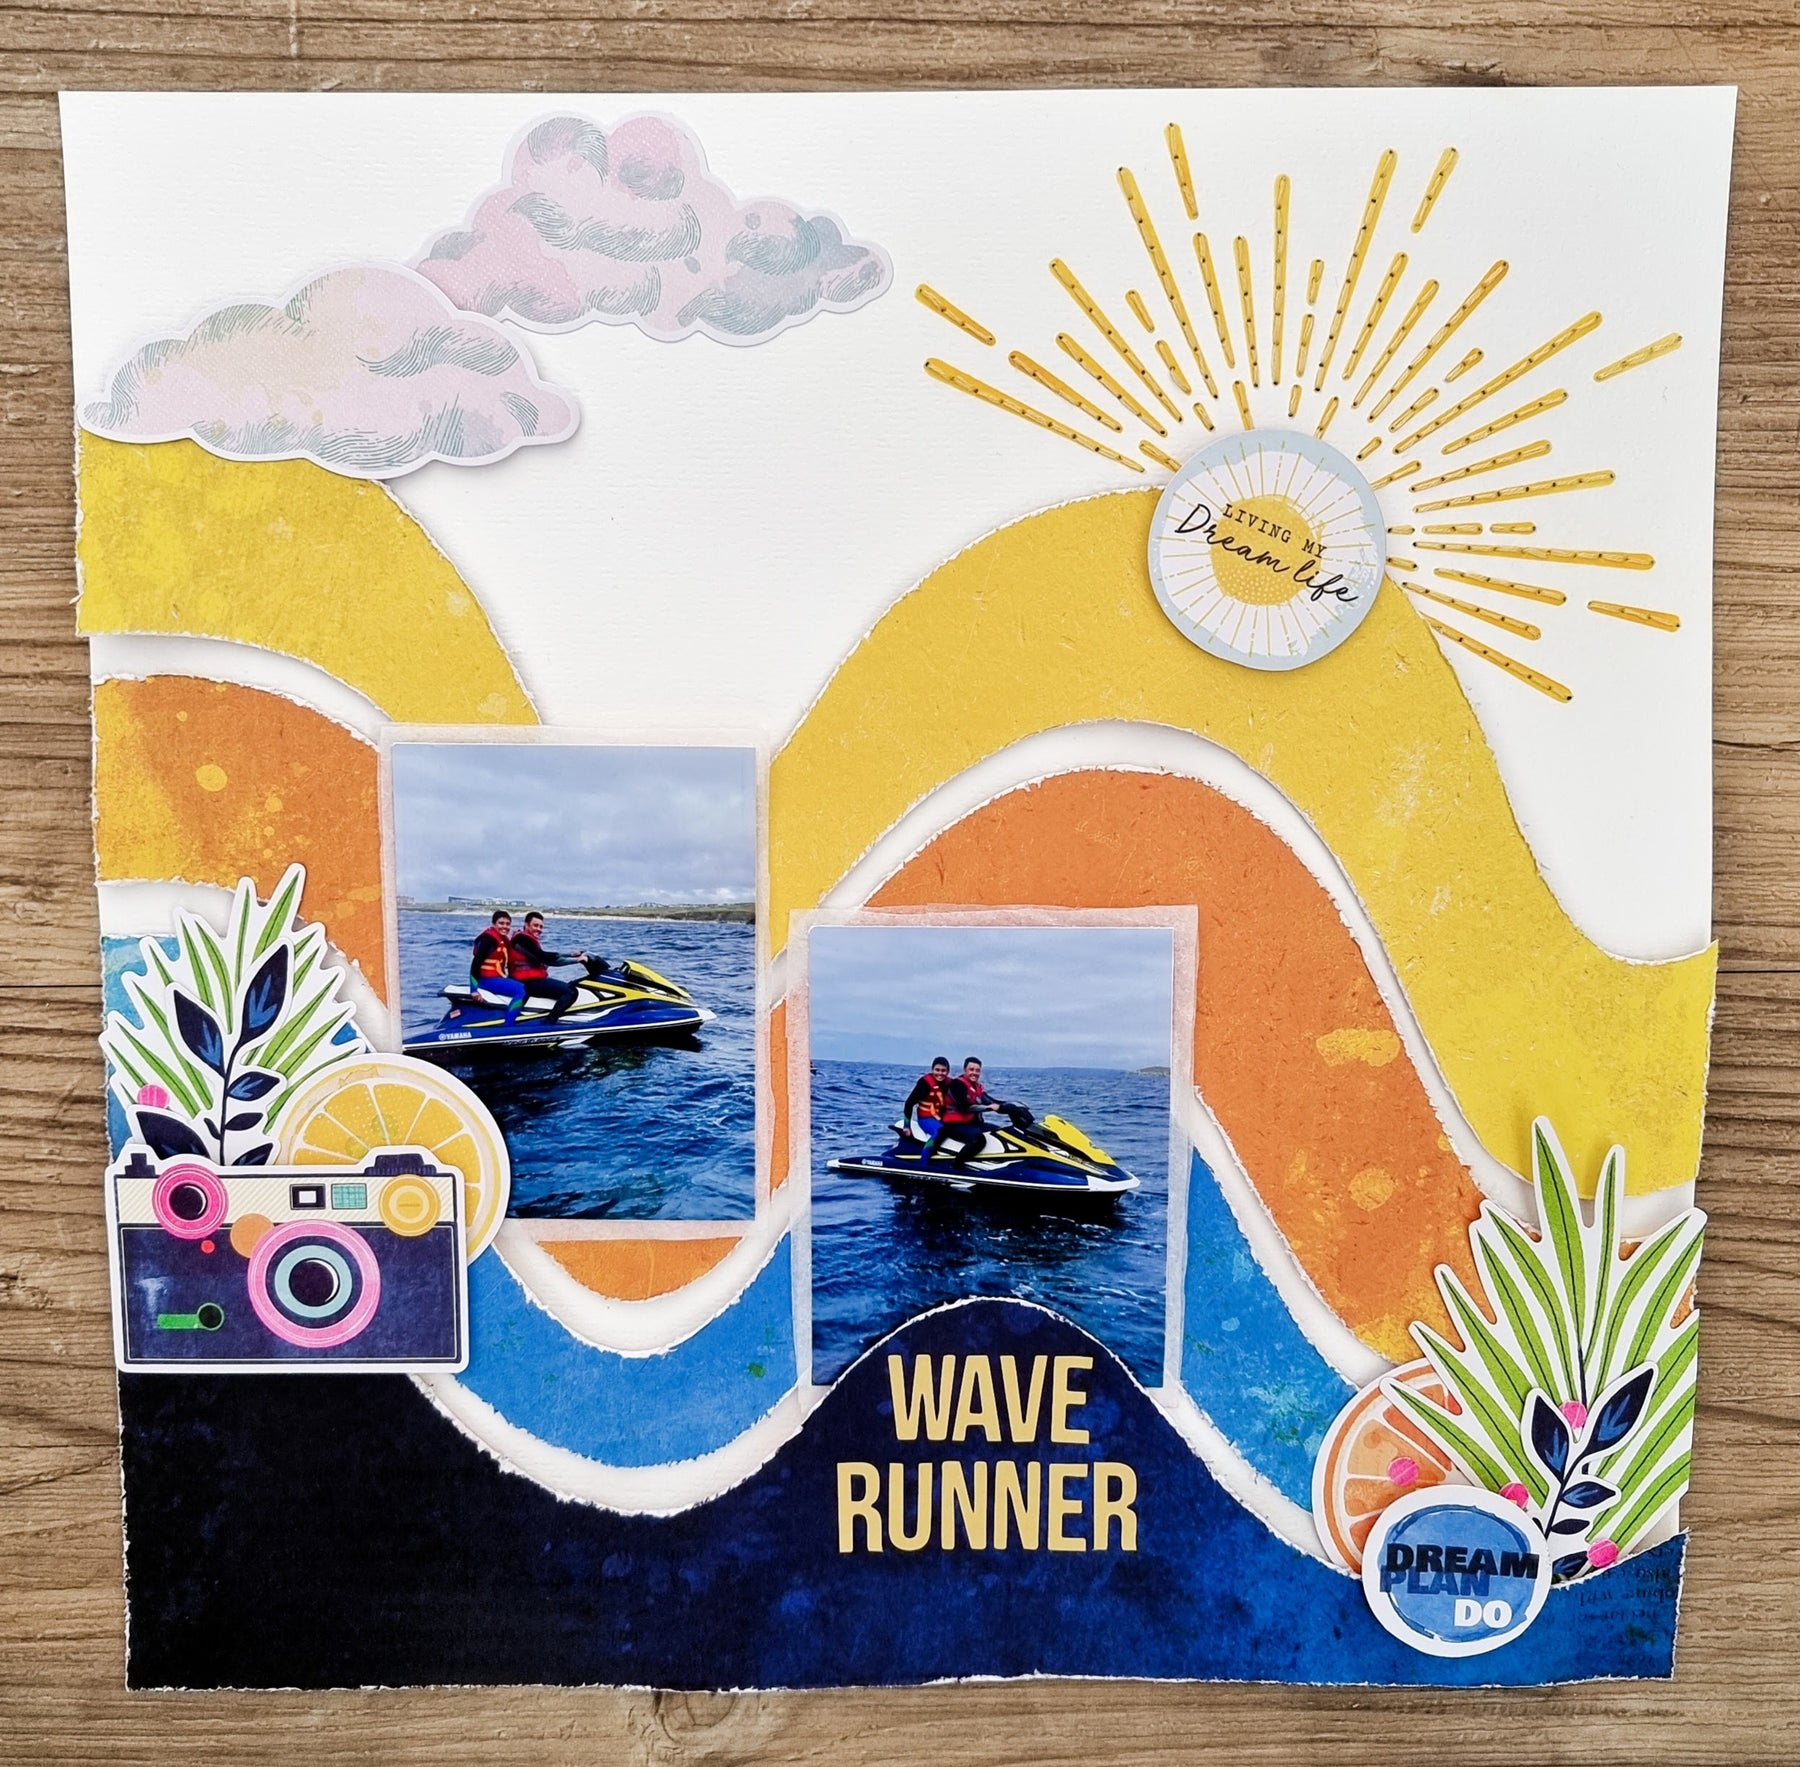 Wave Runner by CHARLEEN WALES